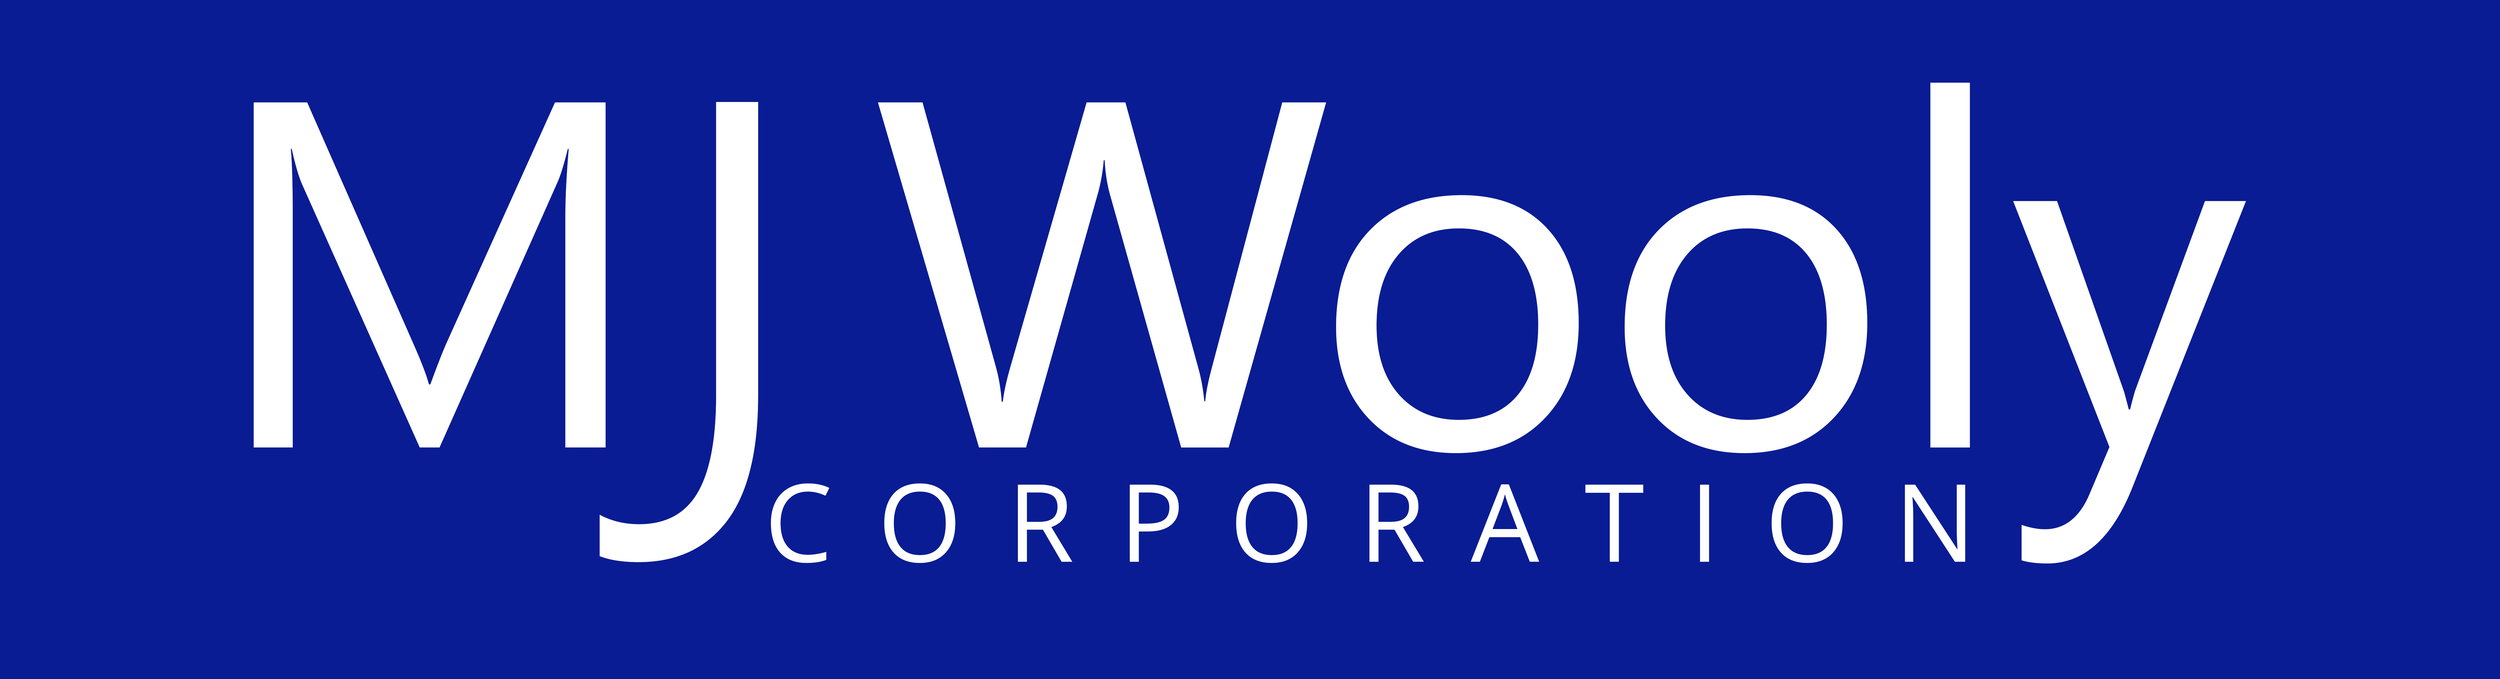 MJ Wooly Corporation